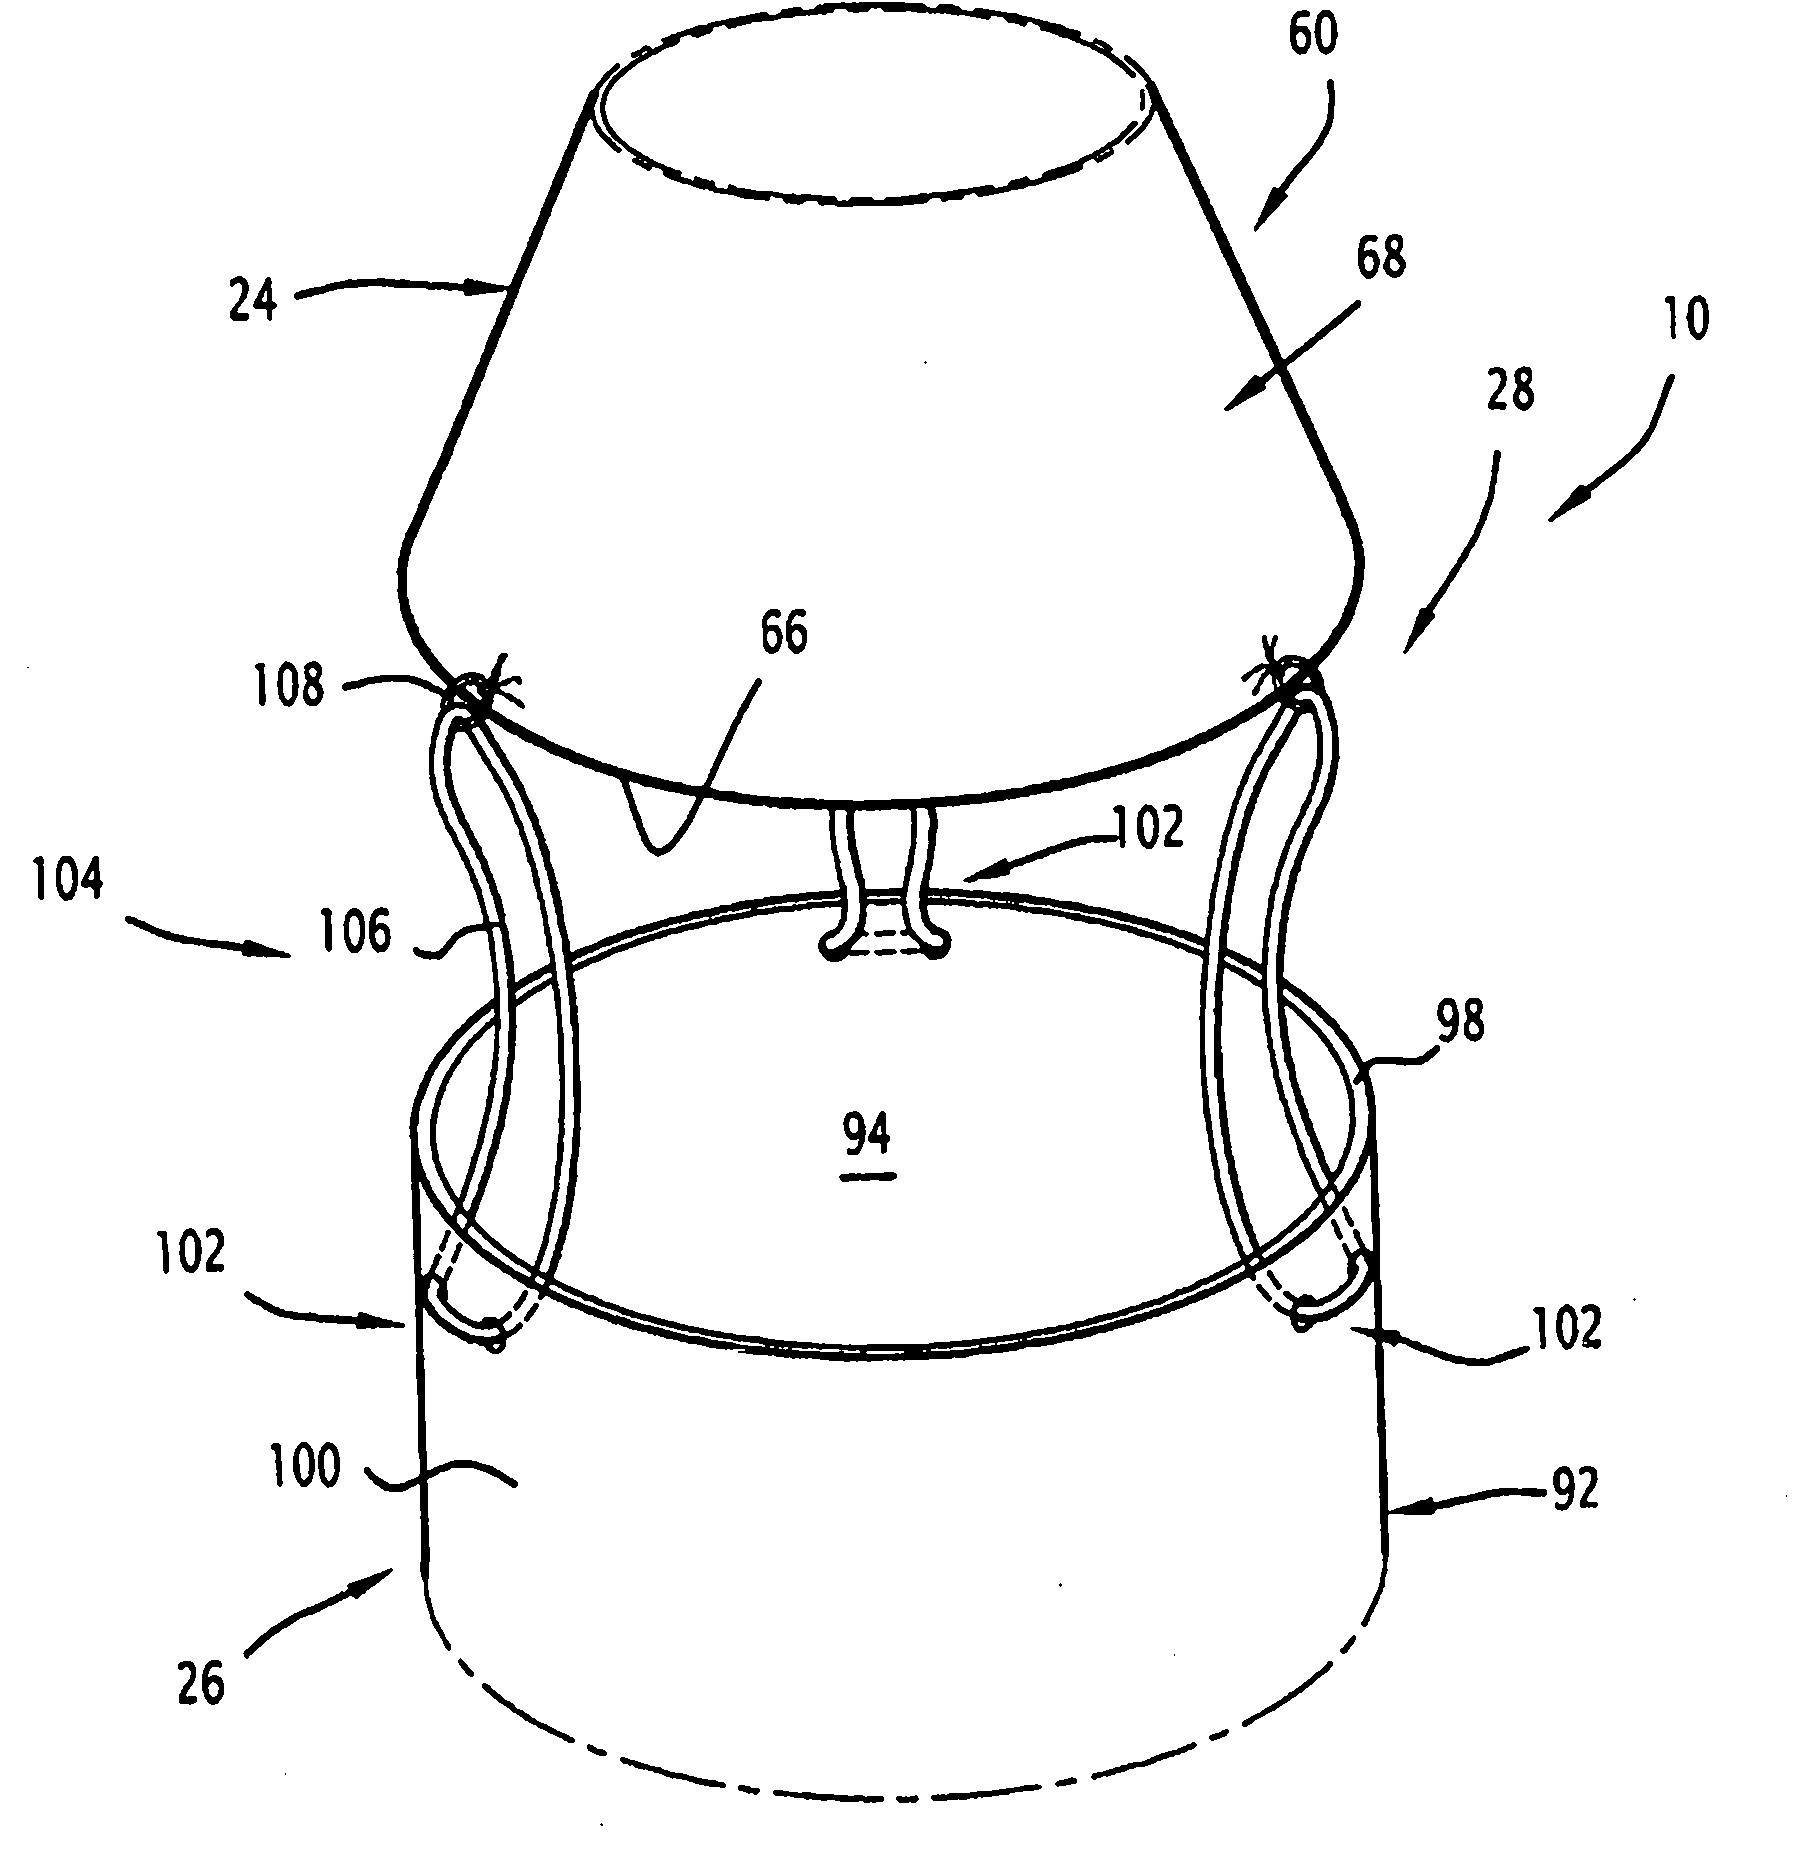 Device for treating a blood circulation conduit